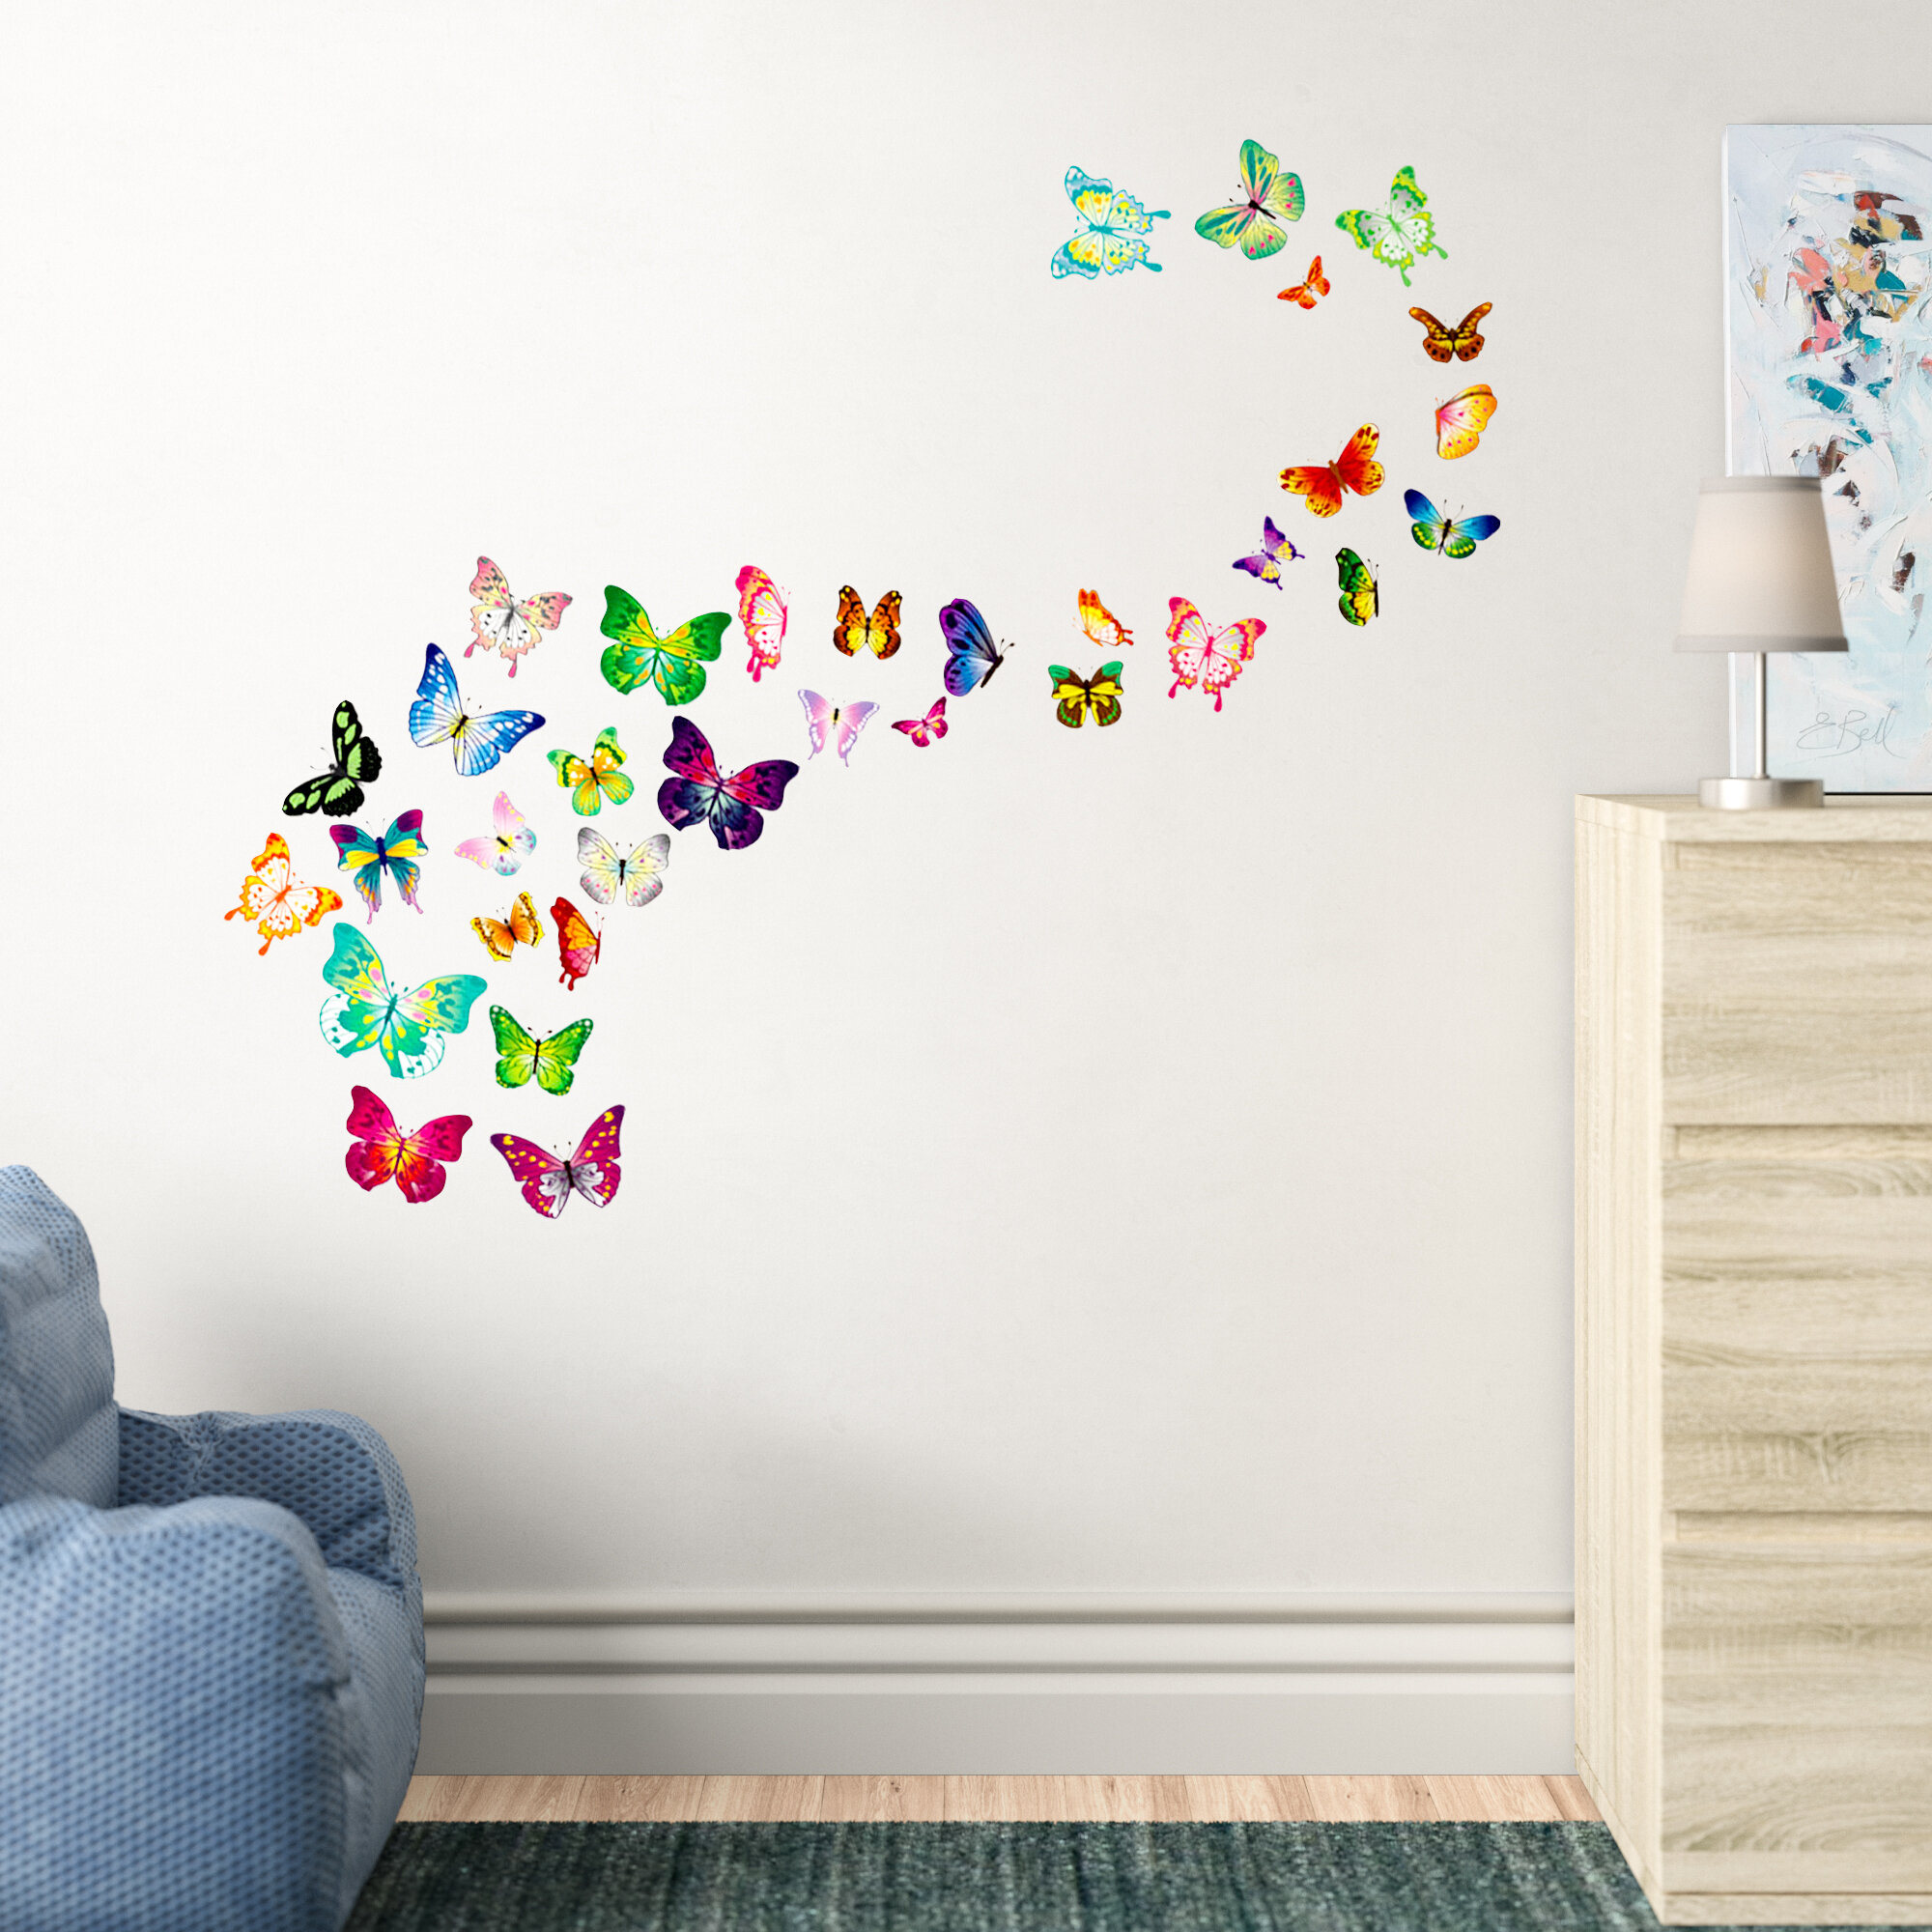 24Pcs Gold Butterfly Wall Sticker Decal 3D Metallic Art Butterfly Mural Decoration DIY Flying Stickers for Kids Bedroom Home Party Nursery Classroom Offices Décor Branches Gold 5 